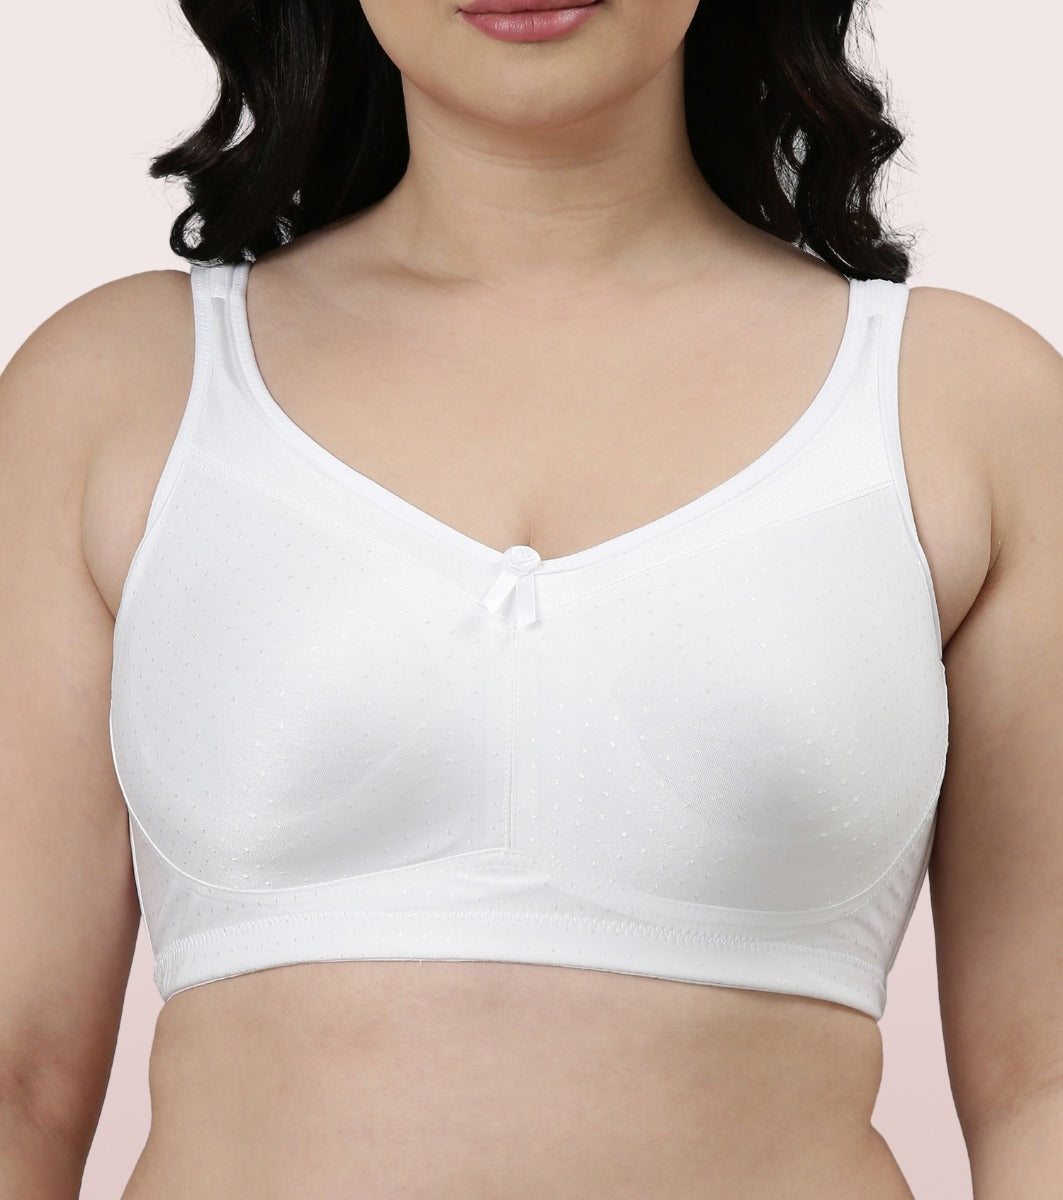 Full Support Smooth Super Lift Bra